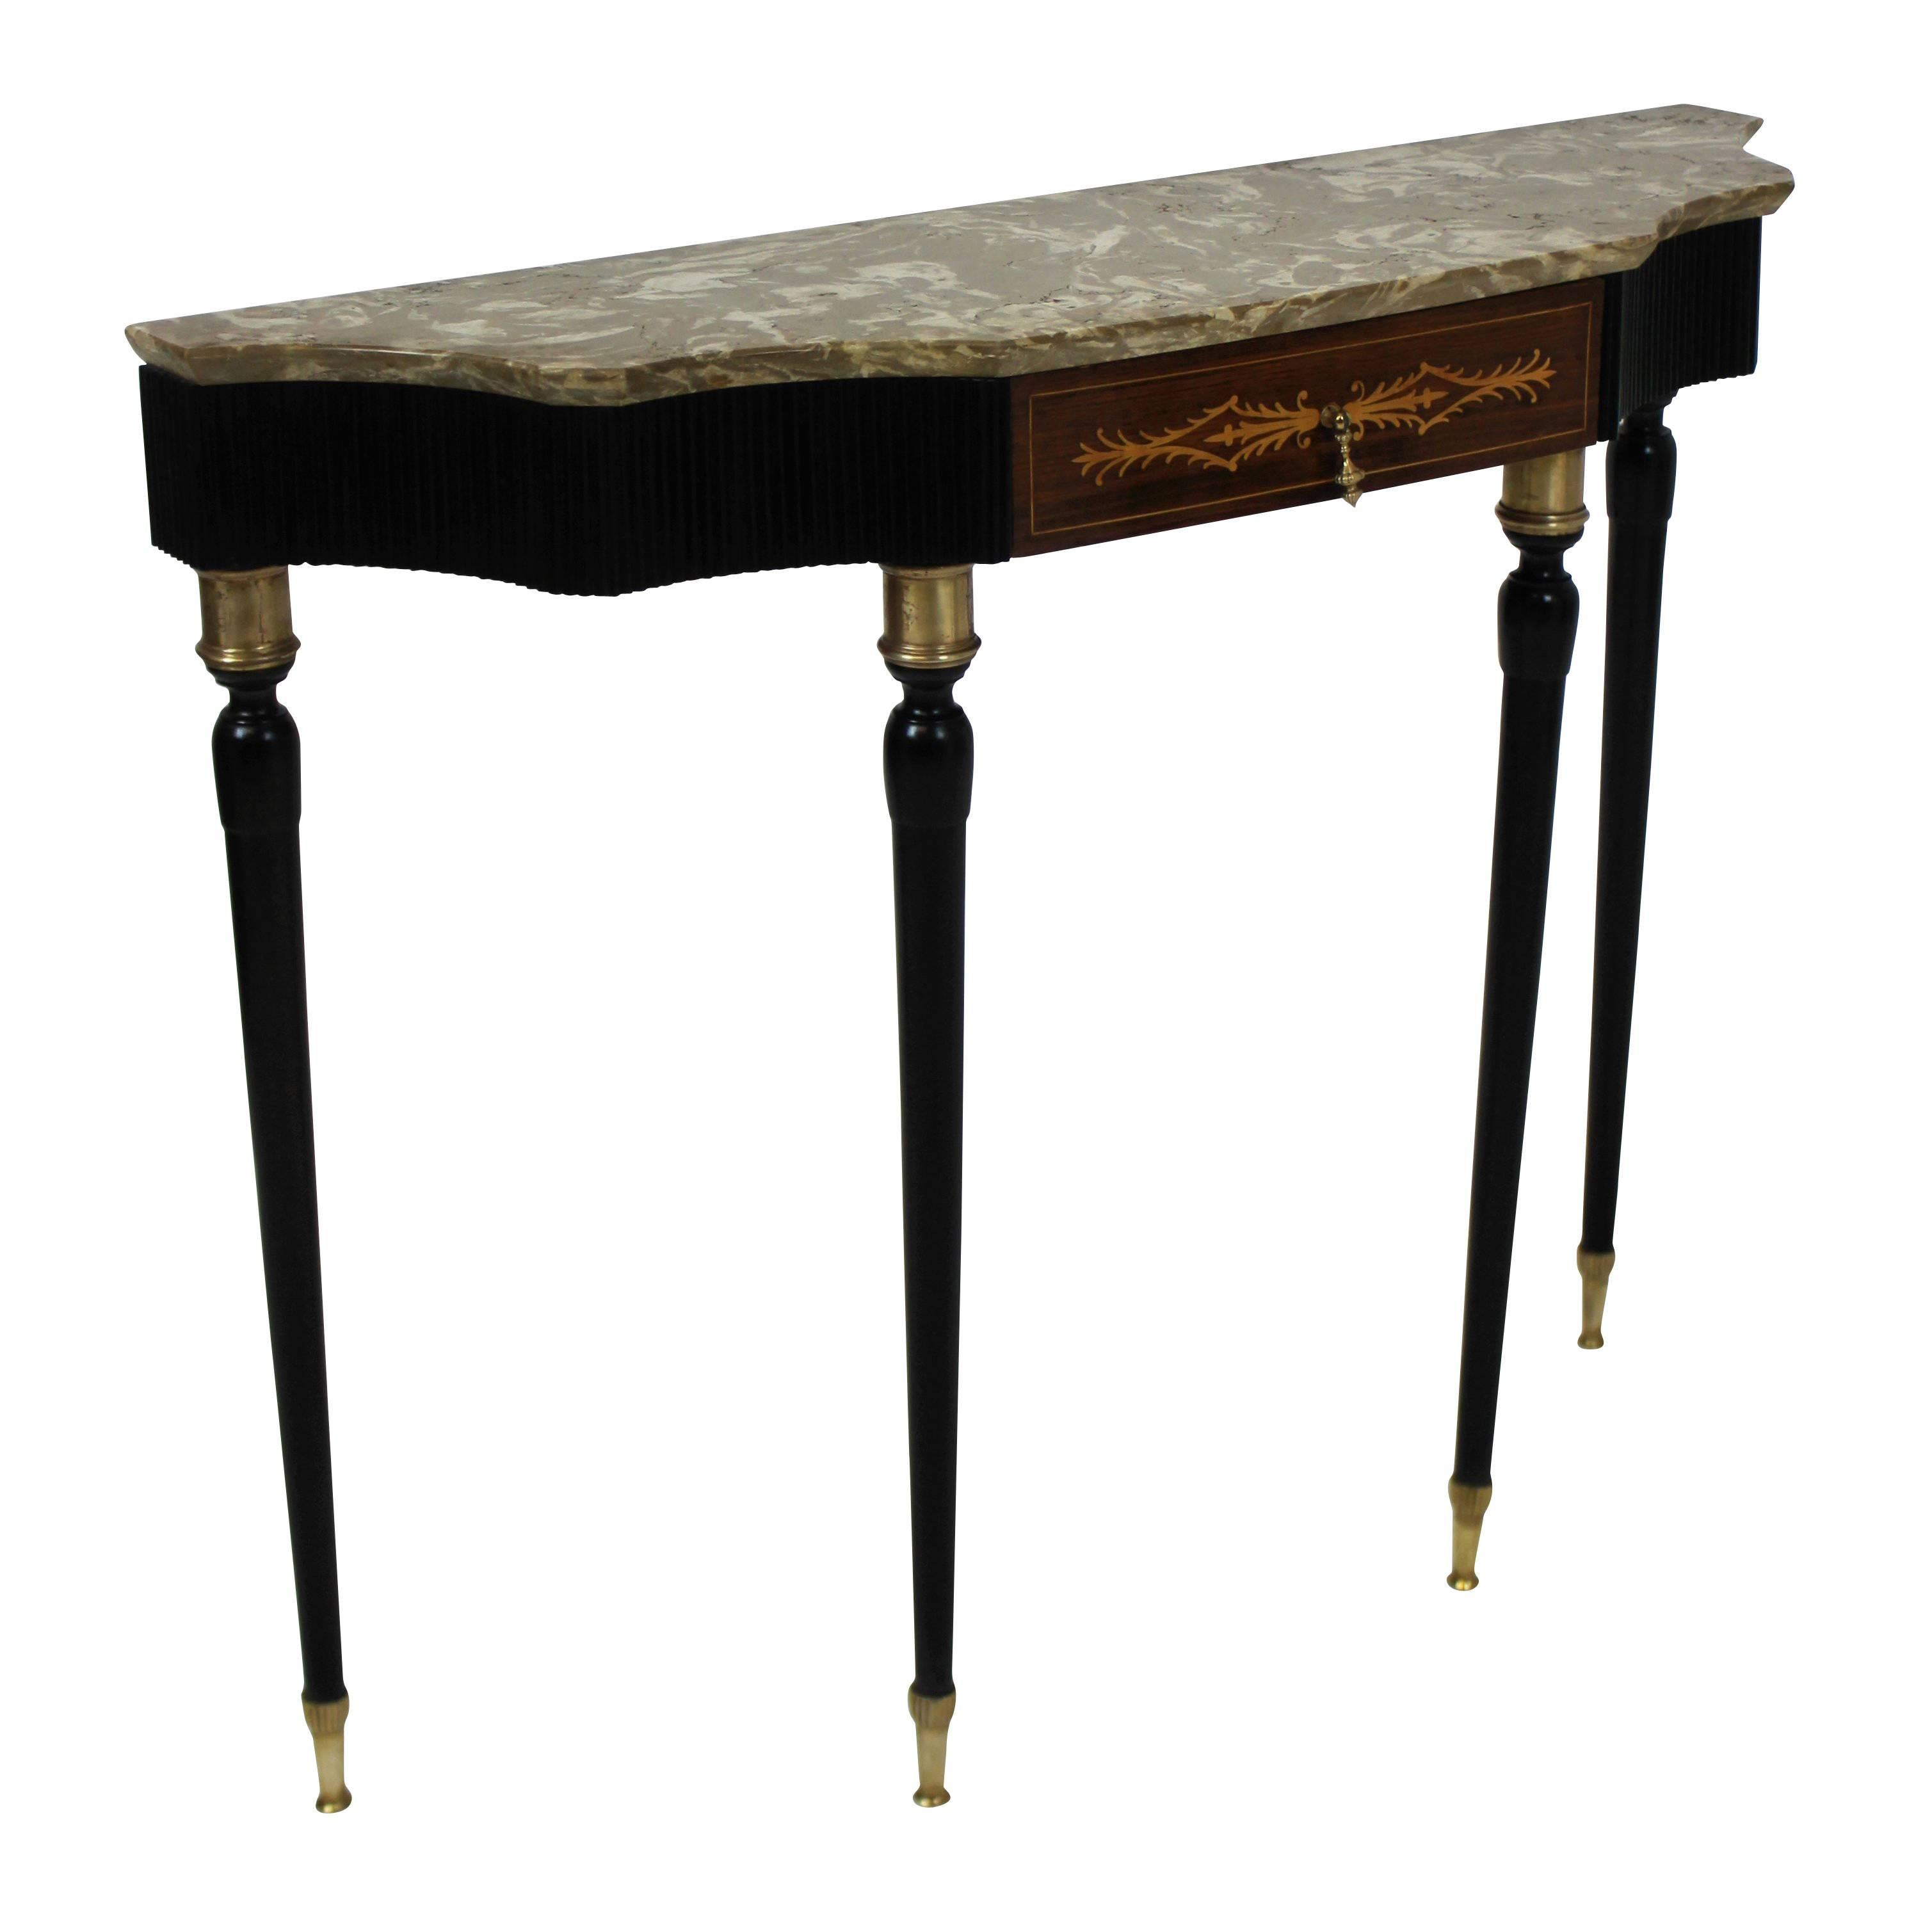 An elegant console table by Paolo Buffa, with ebonised tapering legs and tambour frieze. The central drawer with marquetry decoration. Brass fittings throughout and a beautiful fossil marble-top in a putty colour.
 